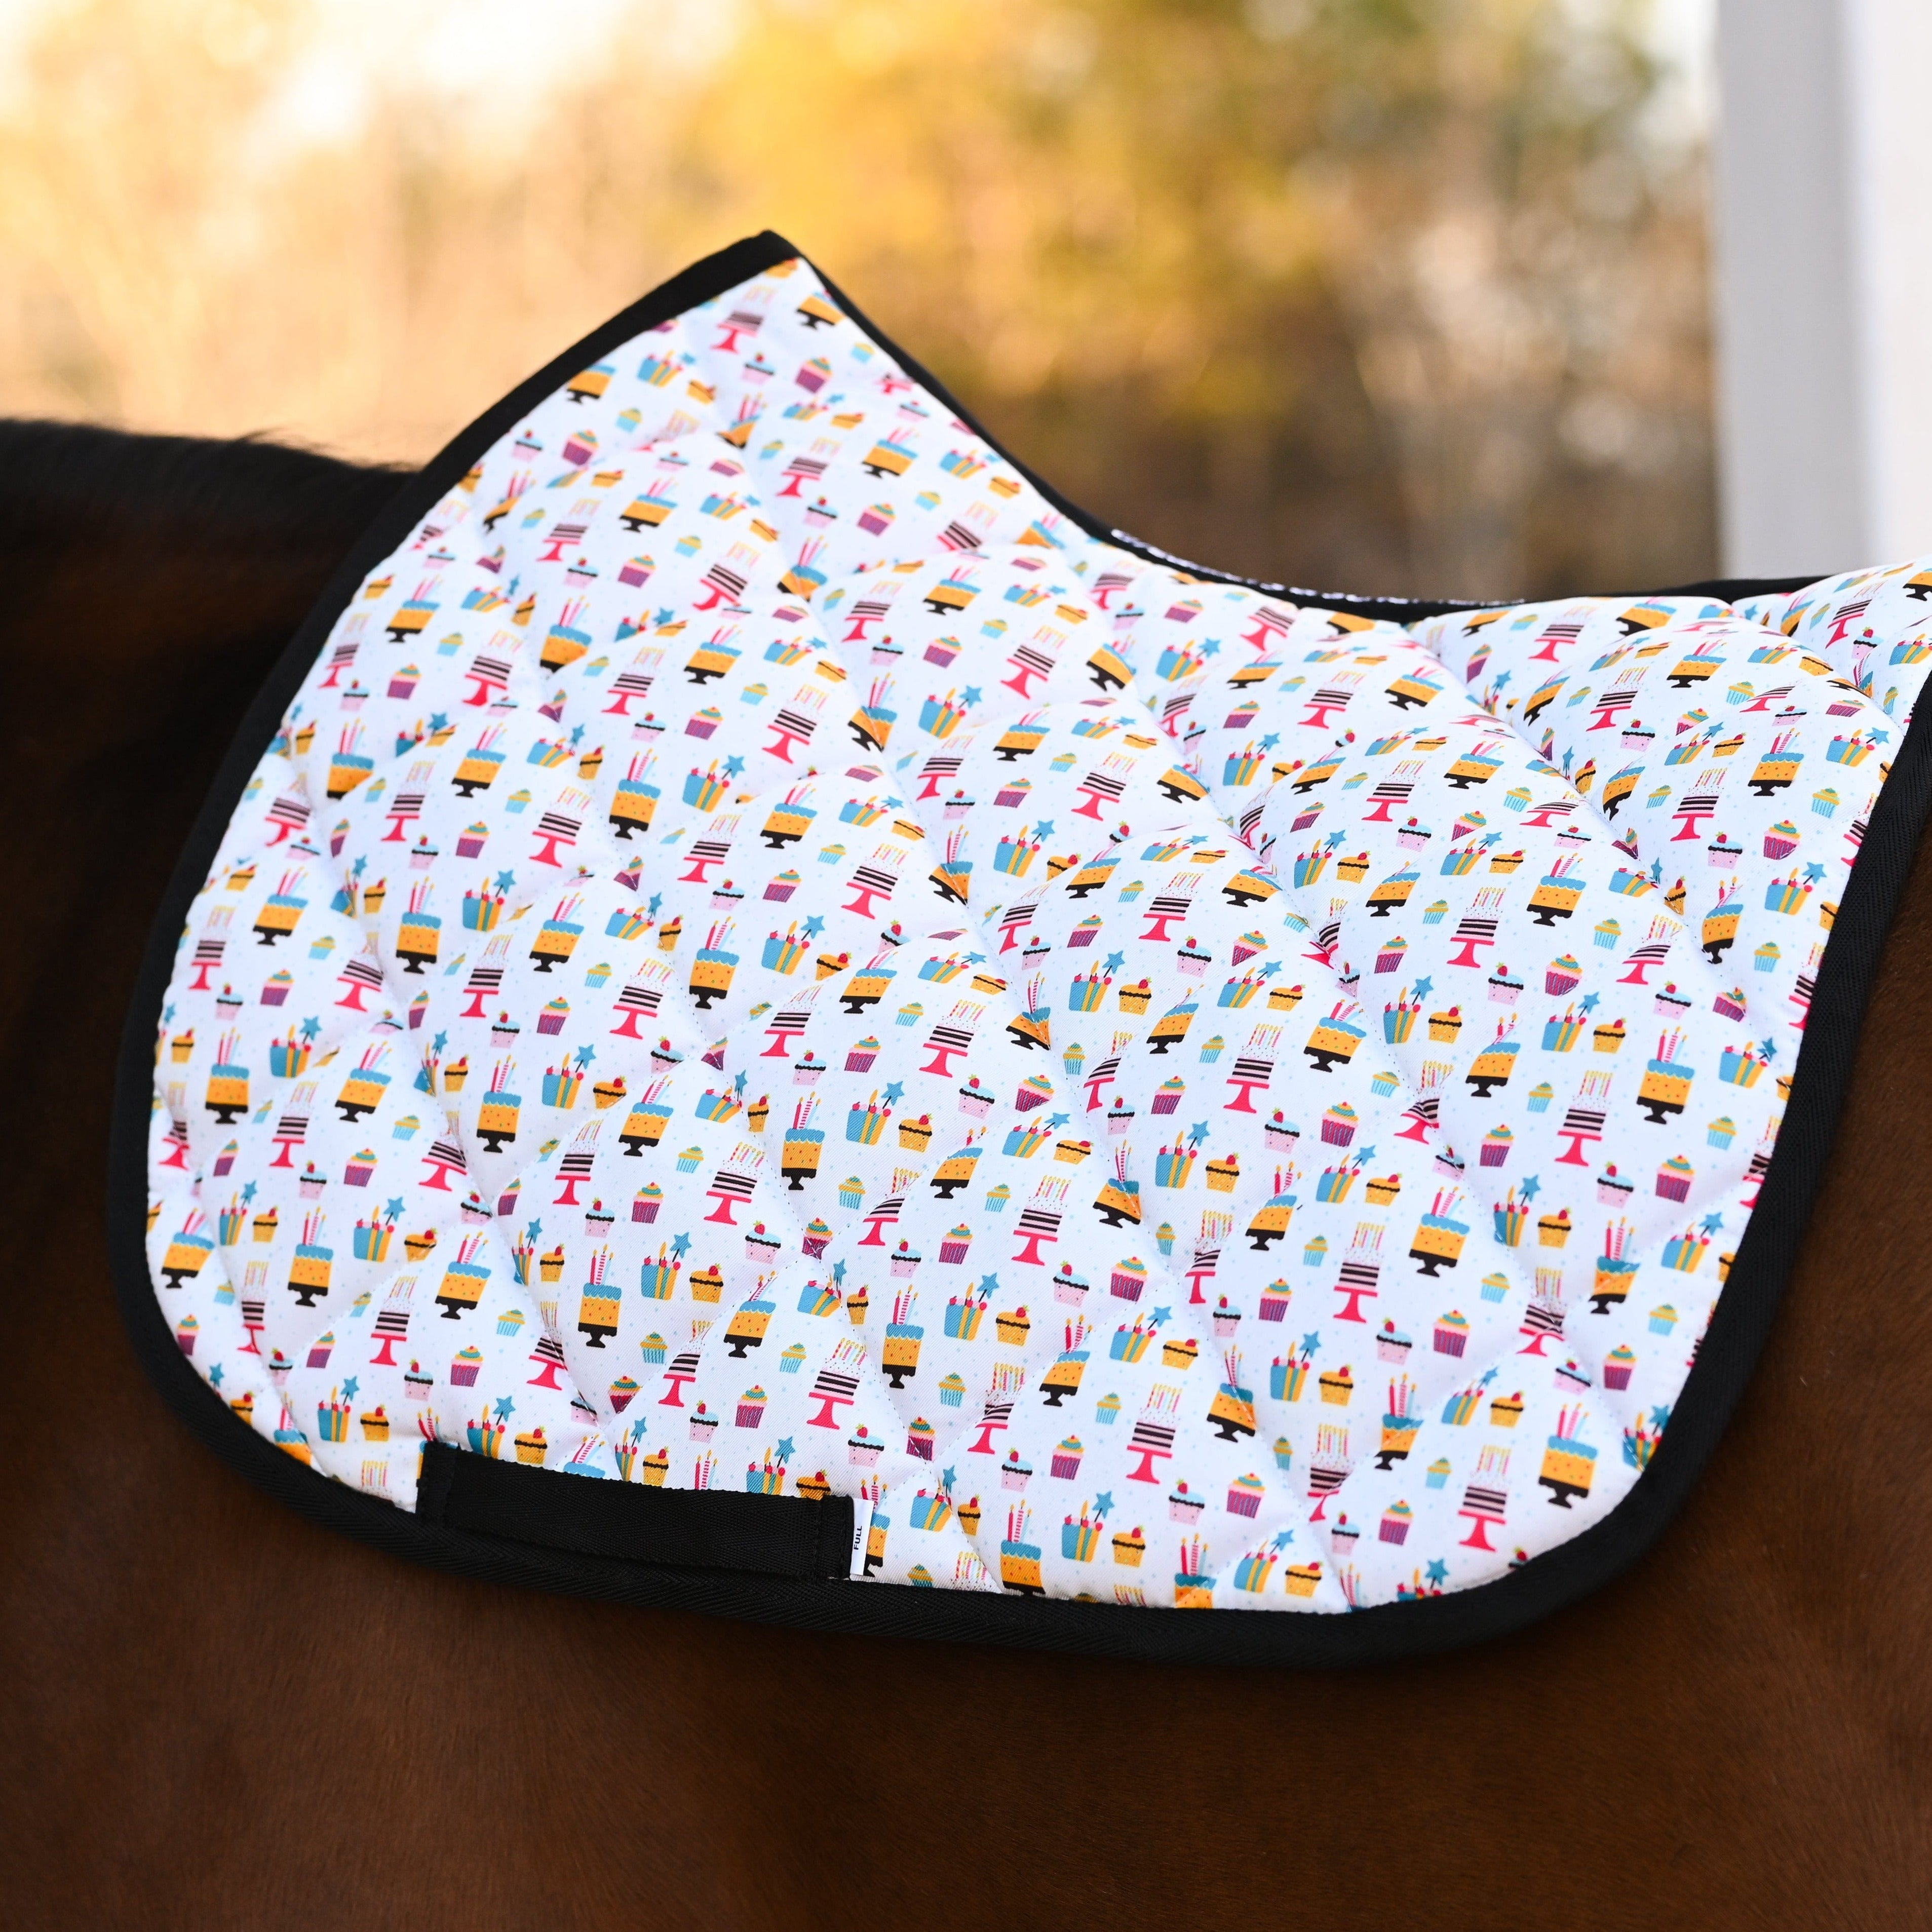 Matching socks and saddle pads  Dreamers & Schemers USA – dreamers &  schemers